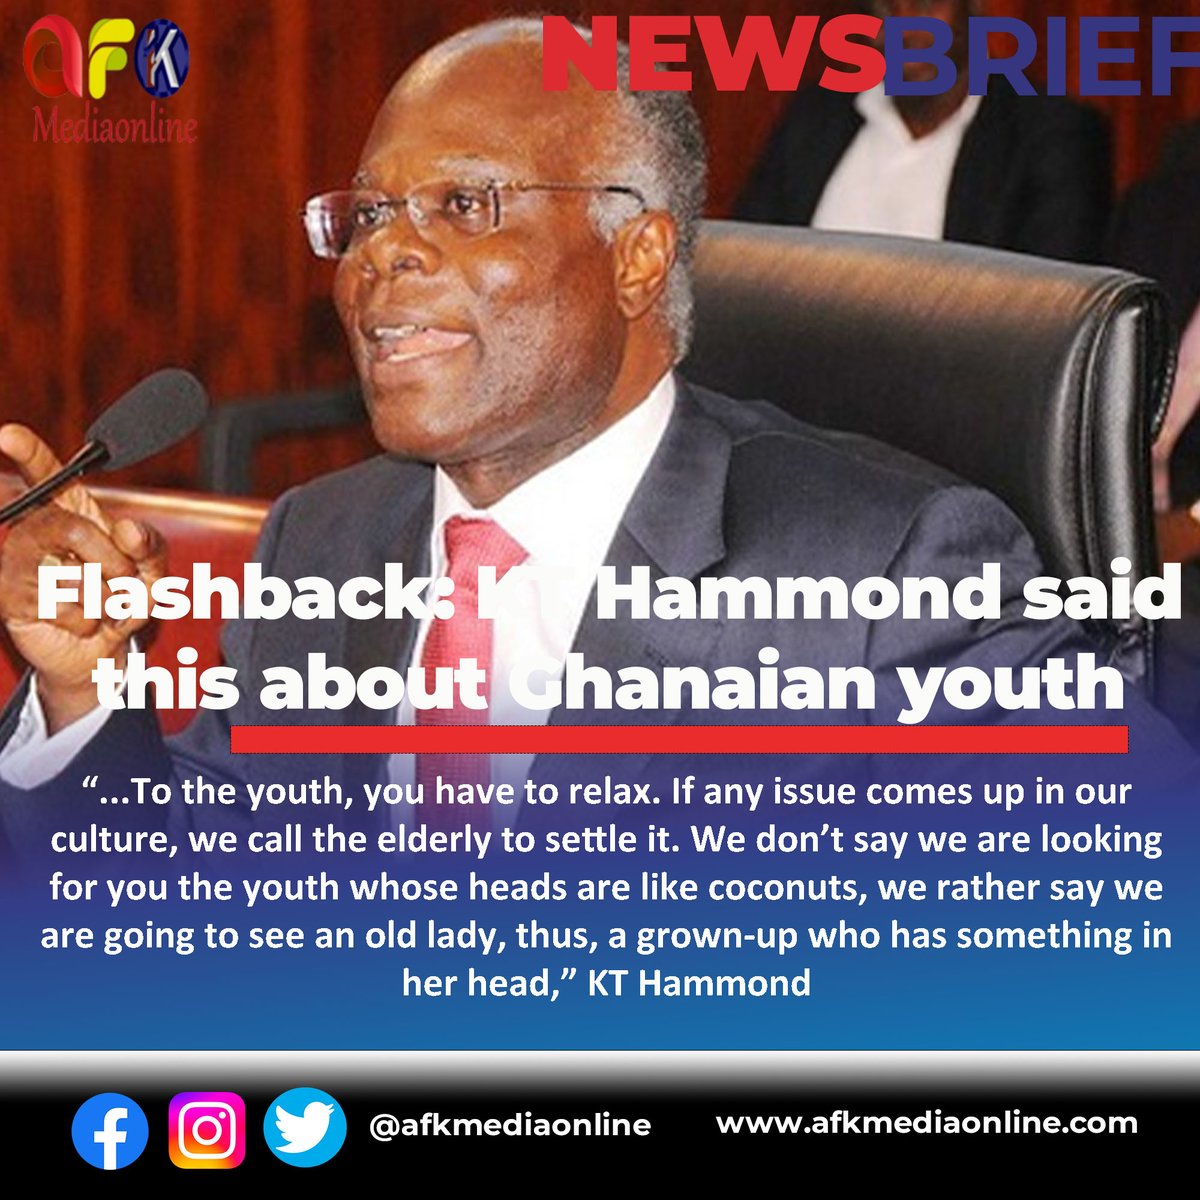 BREAKING NEWS: Just a reminder that KT Hammond once said this about Ghanaian youth but President Akufo-Addo has given him a strategy position. What is your opinion?
|| Ronaldo Christian Atsu Apple Kudus Nana Aba Bryan Acheampong #ThisIsNotAnExcuse